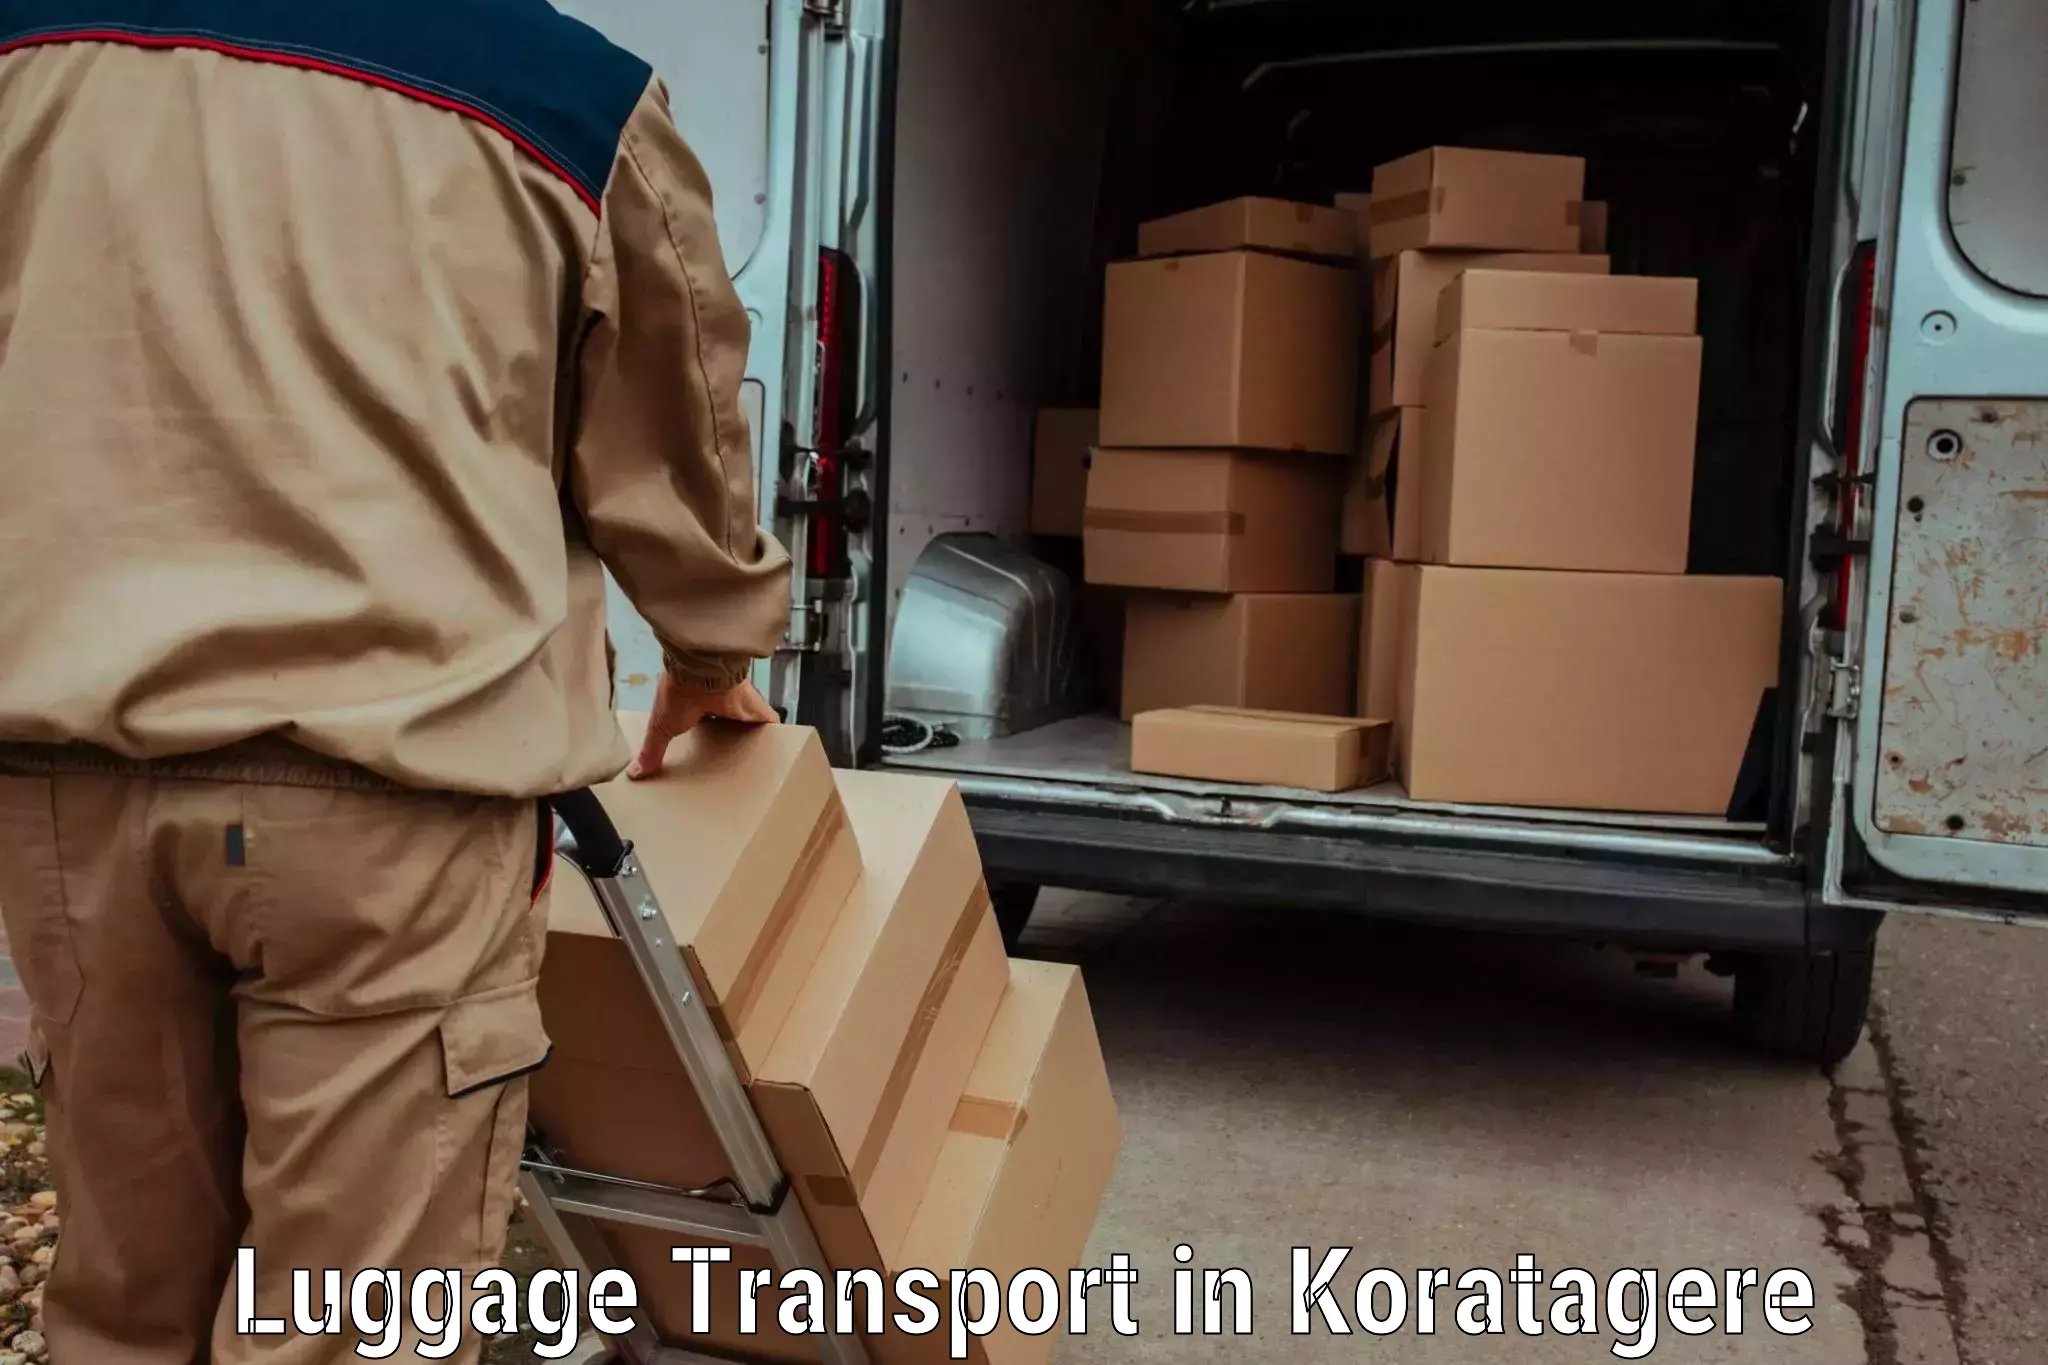 Luggage transfer service in Koratagere